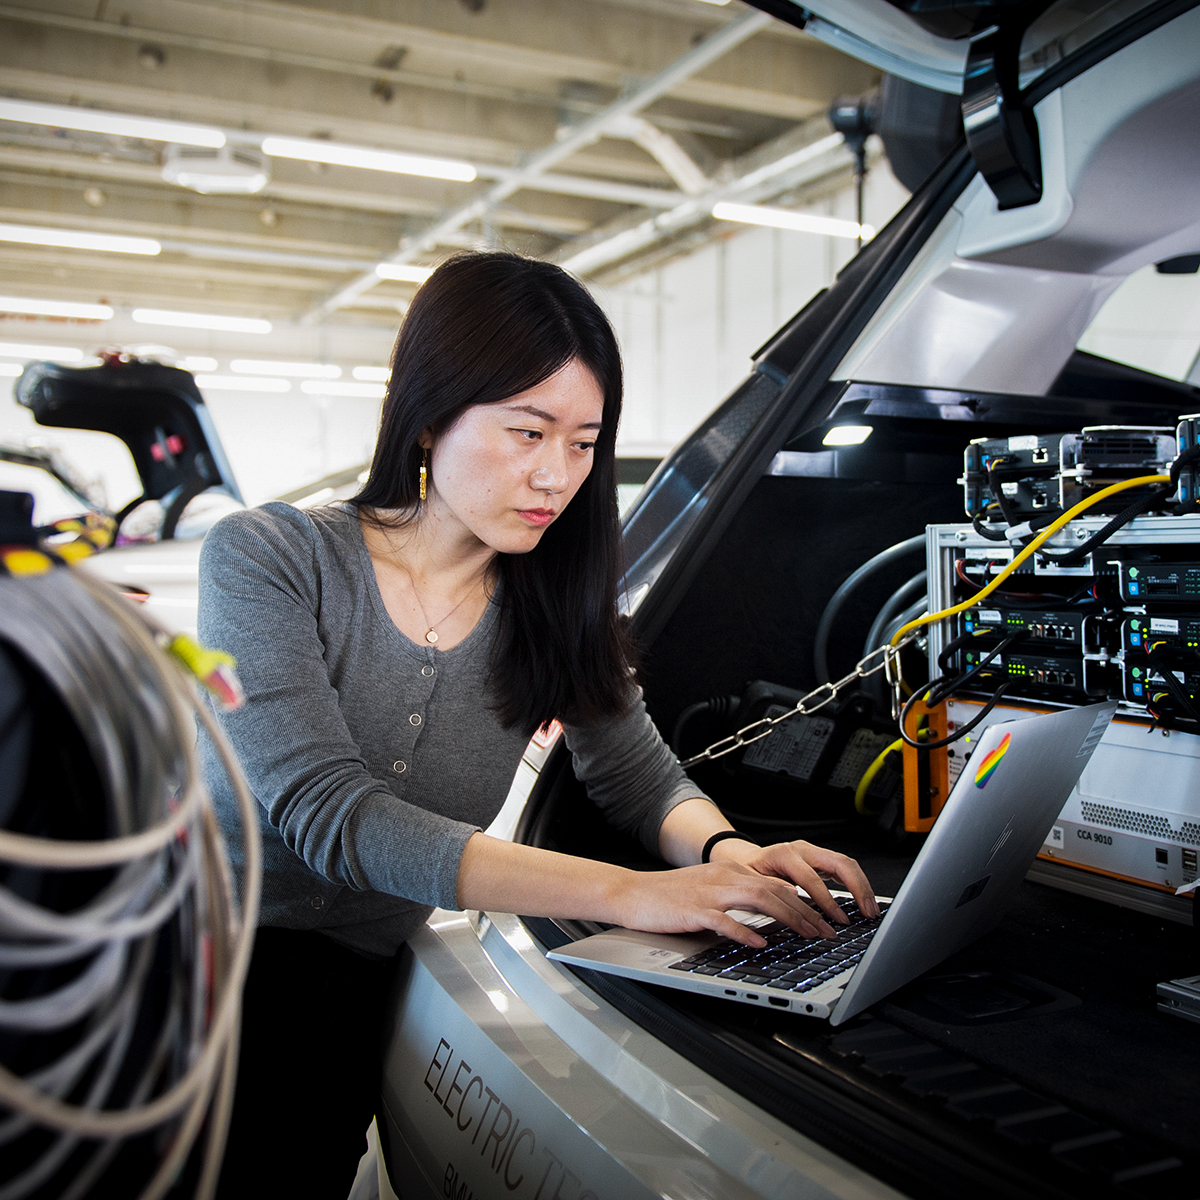 A female software developer works with hardware in the boot.